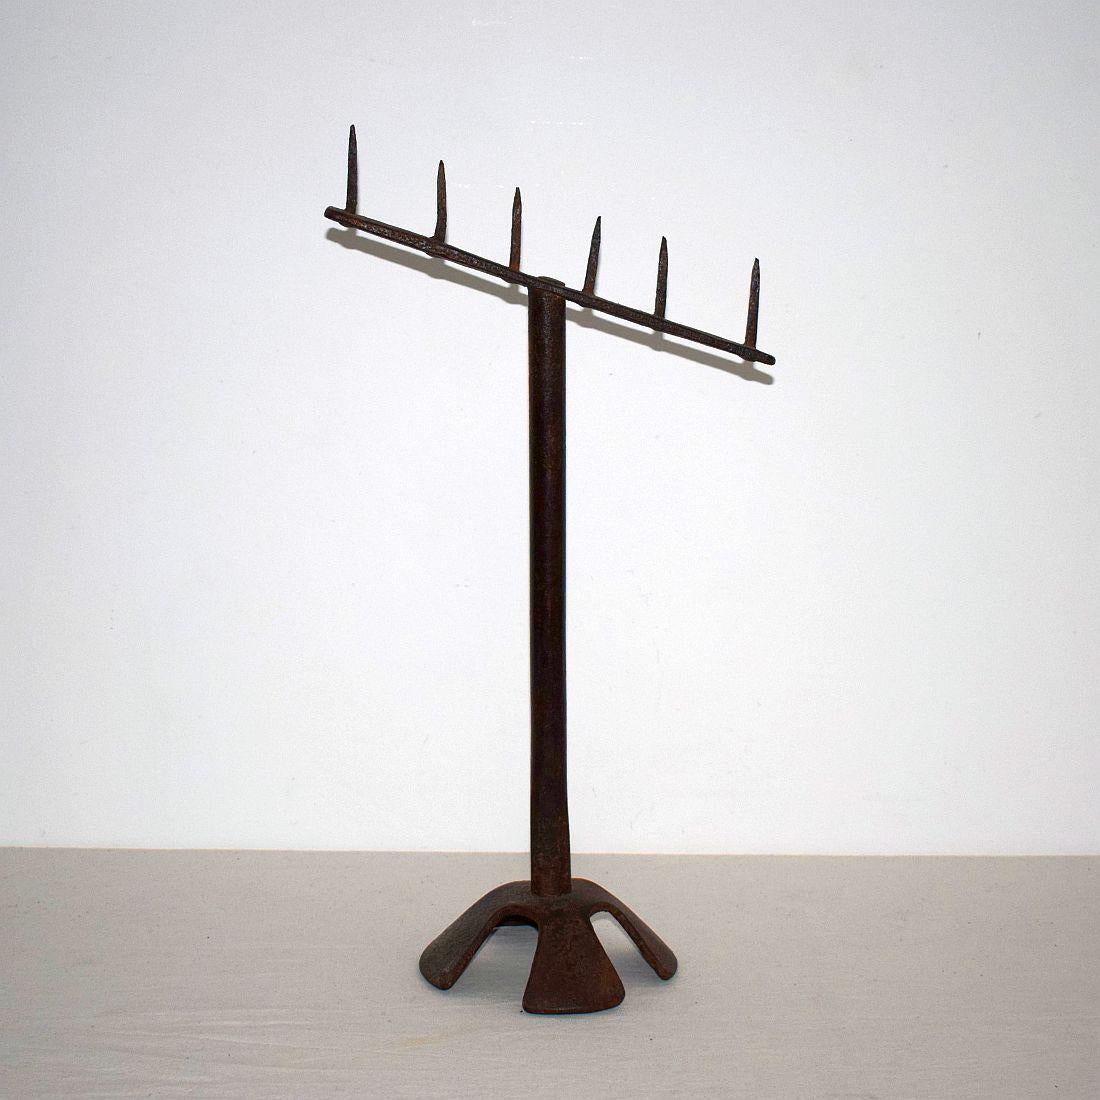 Very old wrought iron candleholder for several candles. Unique piece, Spain, circa 1650-1750.